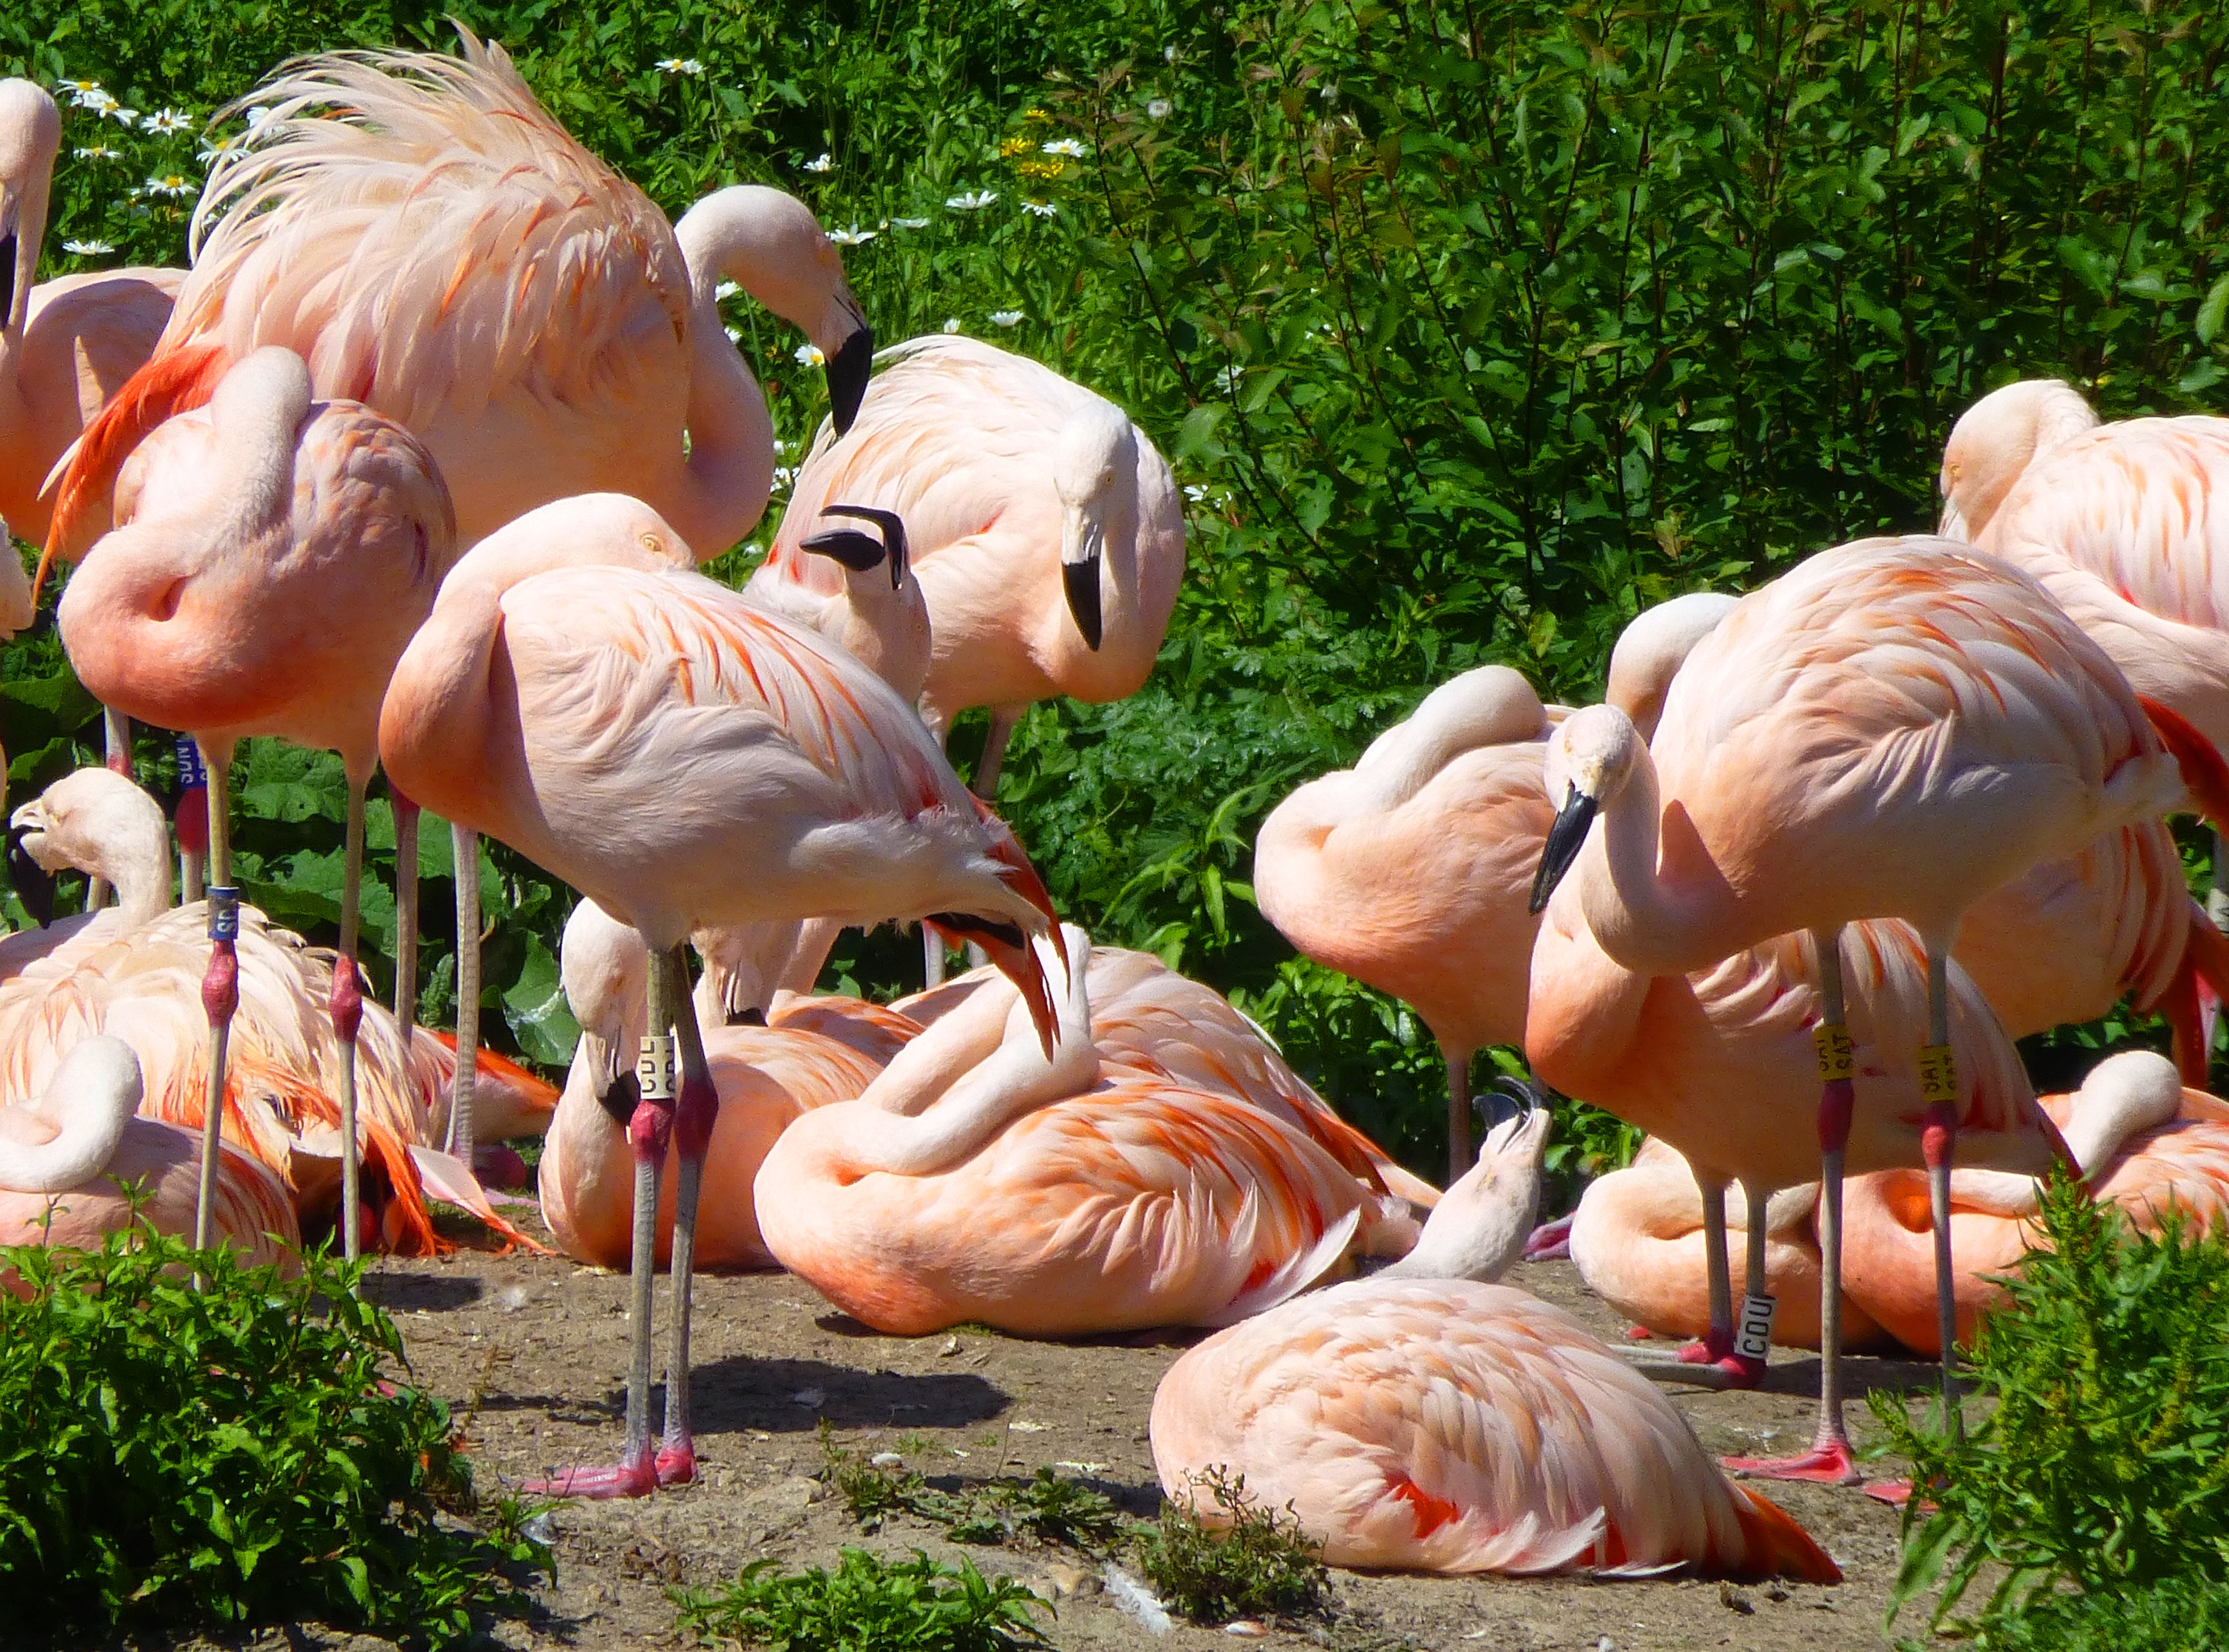 When one flamingo starts a quarrel with its neighbour, this can start a ripple across the group with other flamingo being annoyed and angry too.